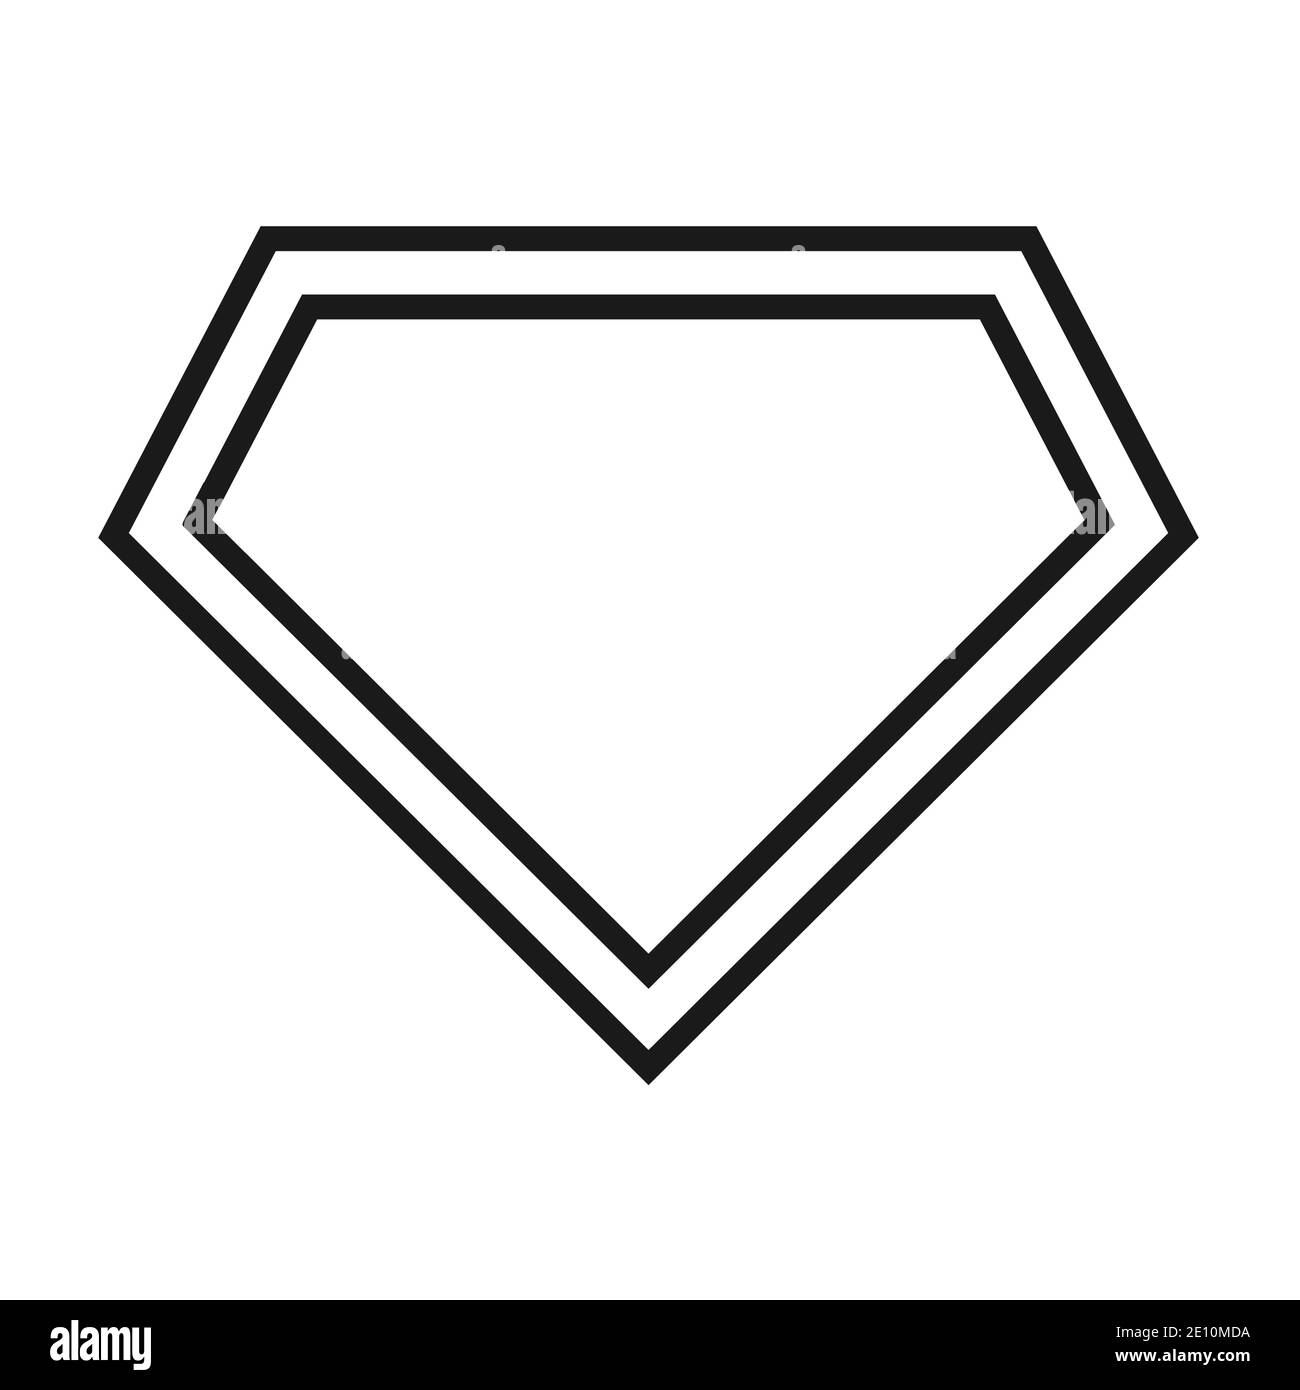 Comic hero icon, symbol shield. Isolated vector on white background . Stock Vector